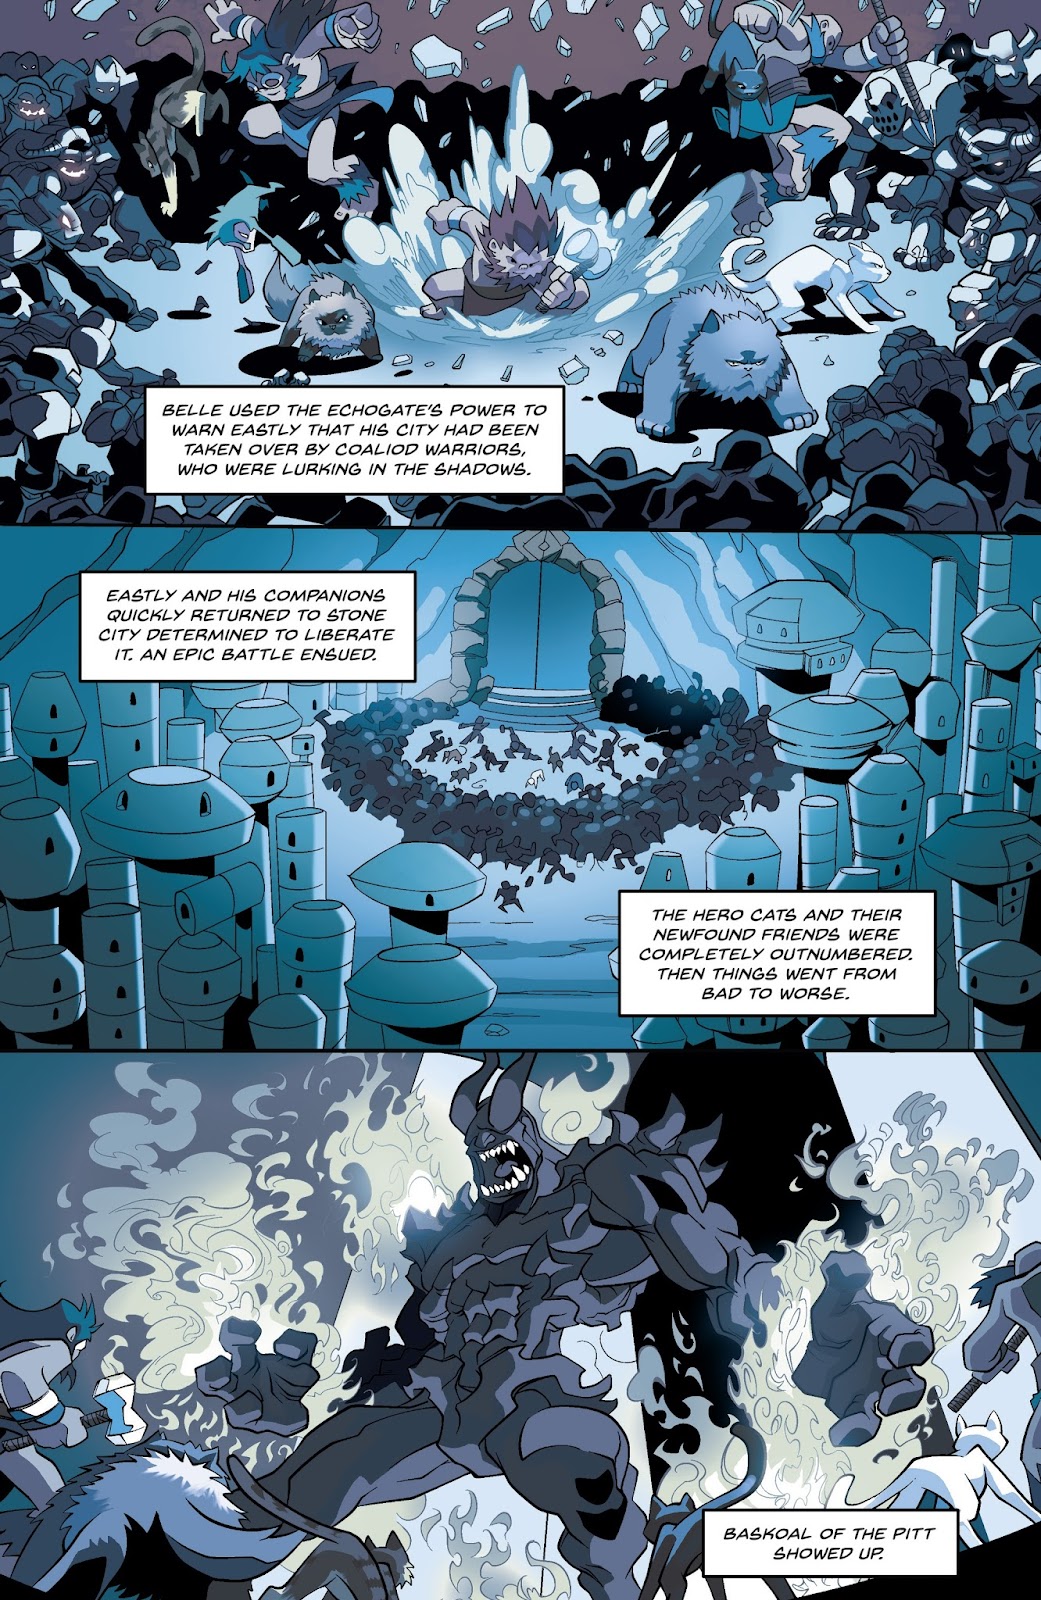 Hero Cats: Midnight Over Stellar City Vol. 2 issue 2 - Page 27